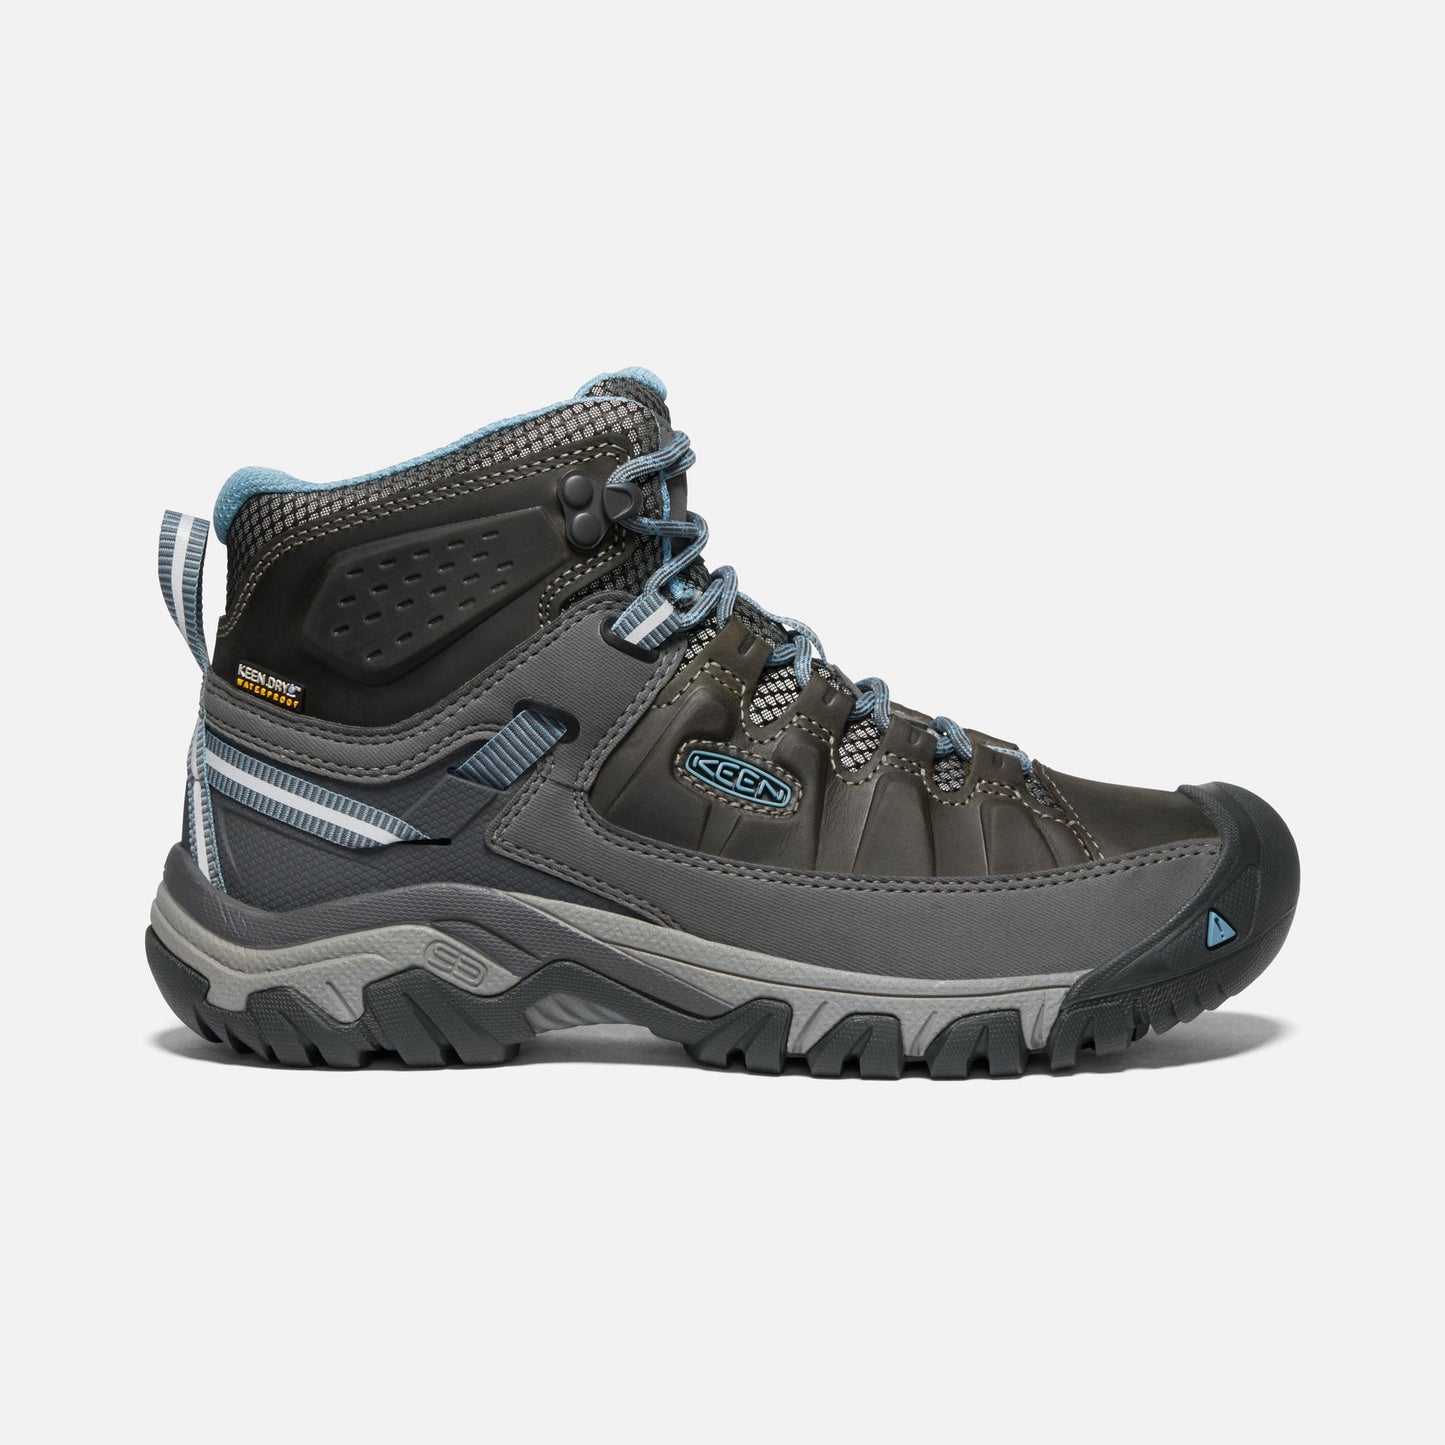 Keen Hiking Boots for Women